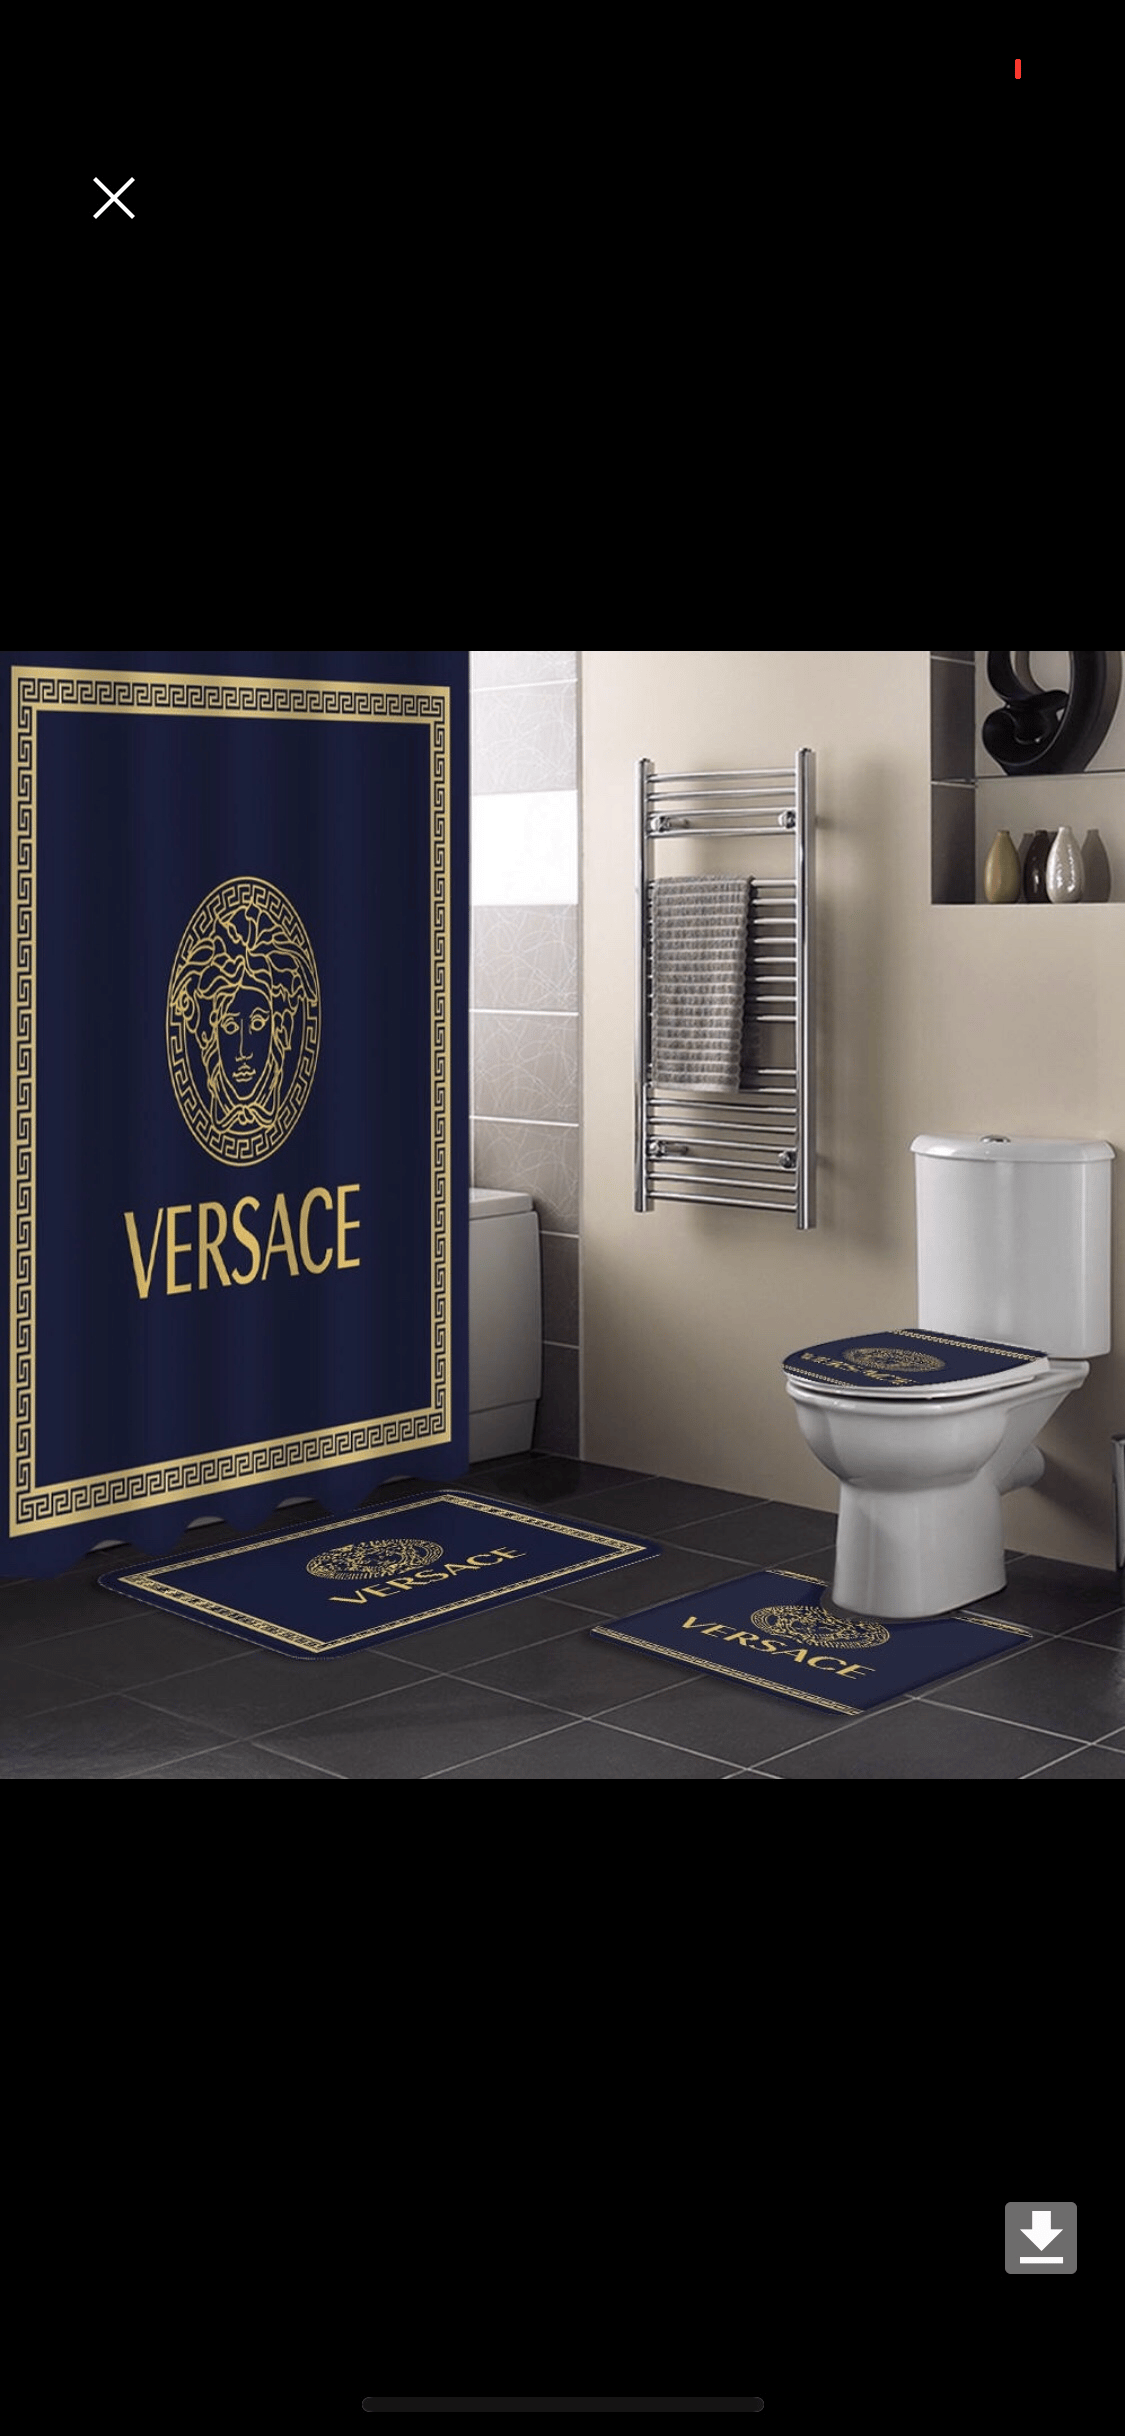 Versace Bathroom Collection Image Of Bathroom And Closet